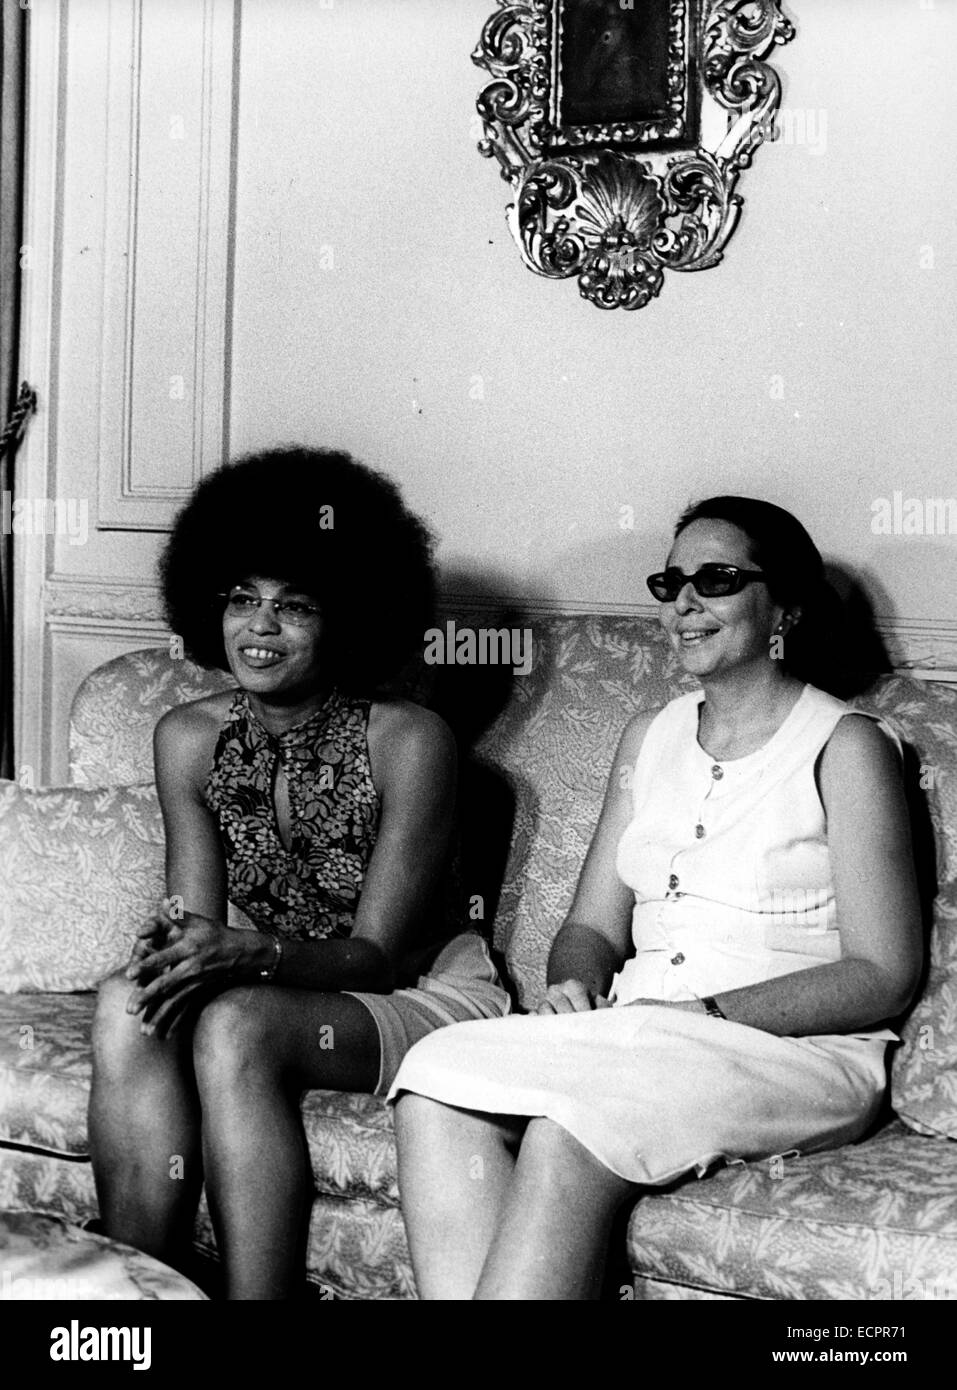 The US and Cuba announced an agreement between the two countries that will be a first step toward normalizing relations. PICTURED: Oct. 6, 1972 - Cuba - Political activist ANGELA DAVIS with VILMA ESPIN, president of the Cuban Women's Federation and member of the Central Committee of the Cuban Communist Party. © KEYSTONE Pictures USA/ZUMAPRESS.com/Alamy Live News Stock Photo